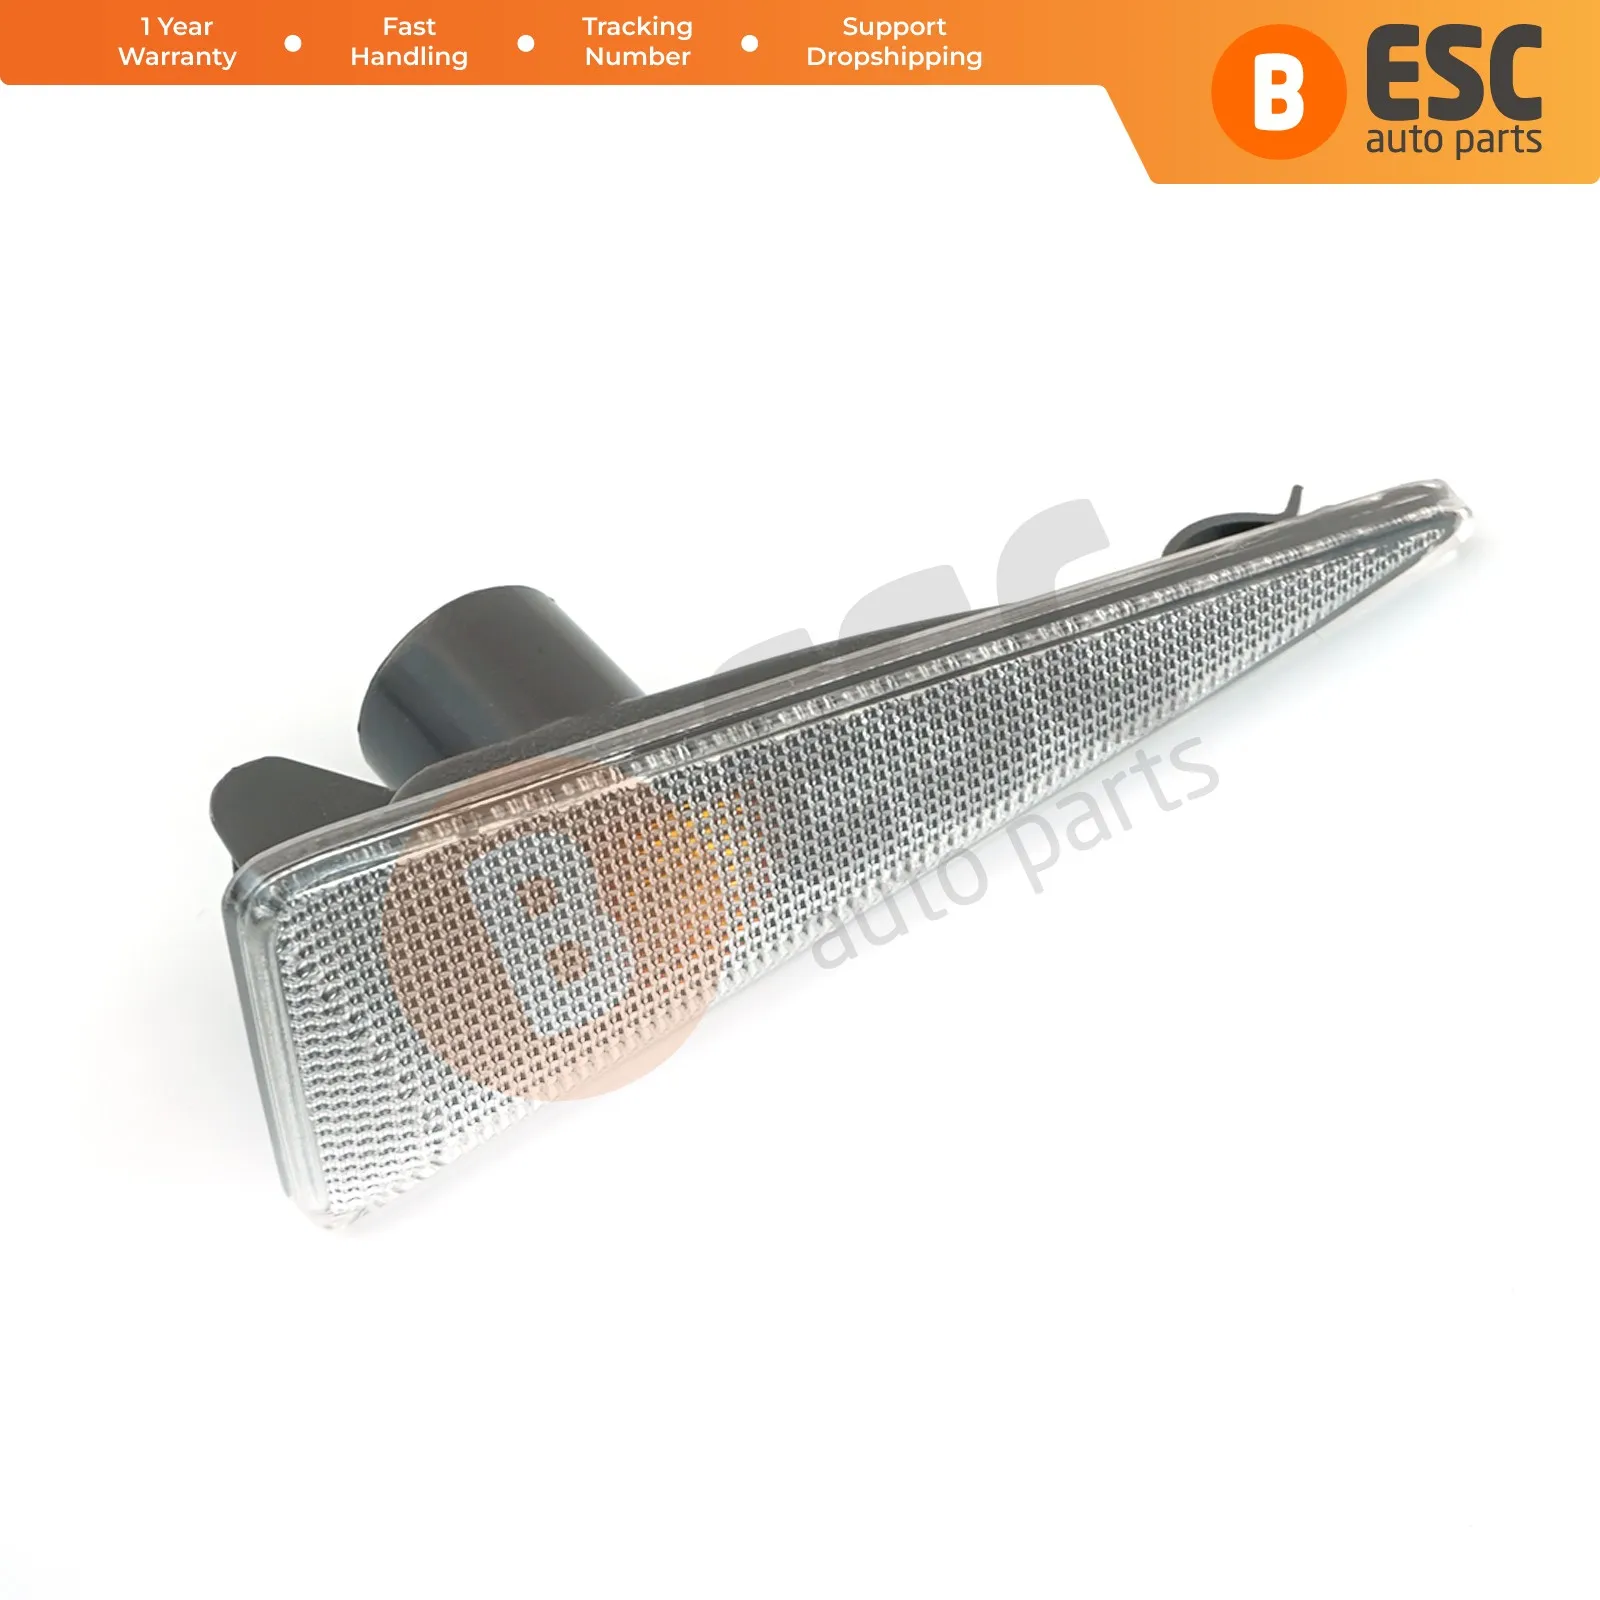 

ESC Auto Parts ESP739 White Side Indicator Repeater Lamp Left 8200027150 for Renault Fast Shipment Ship From Turkey